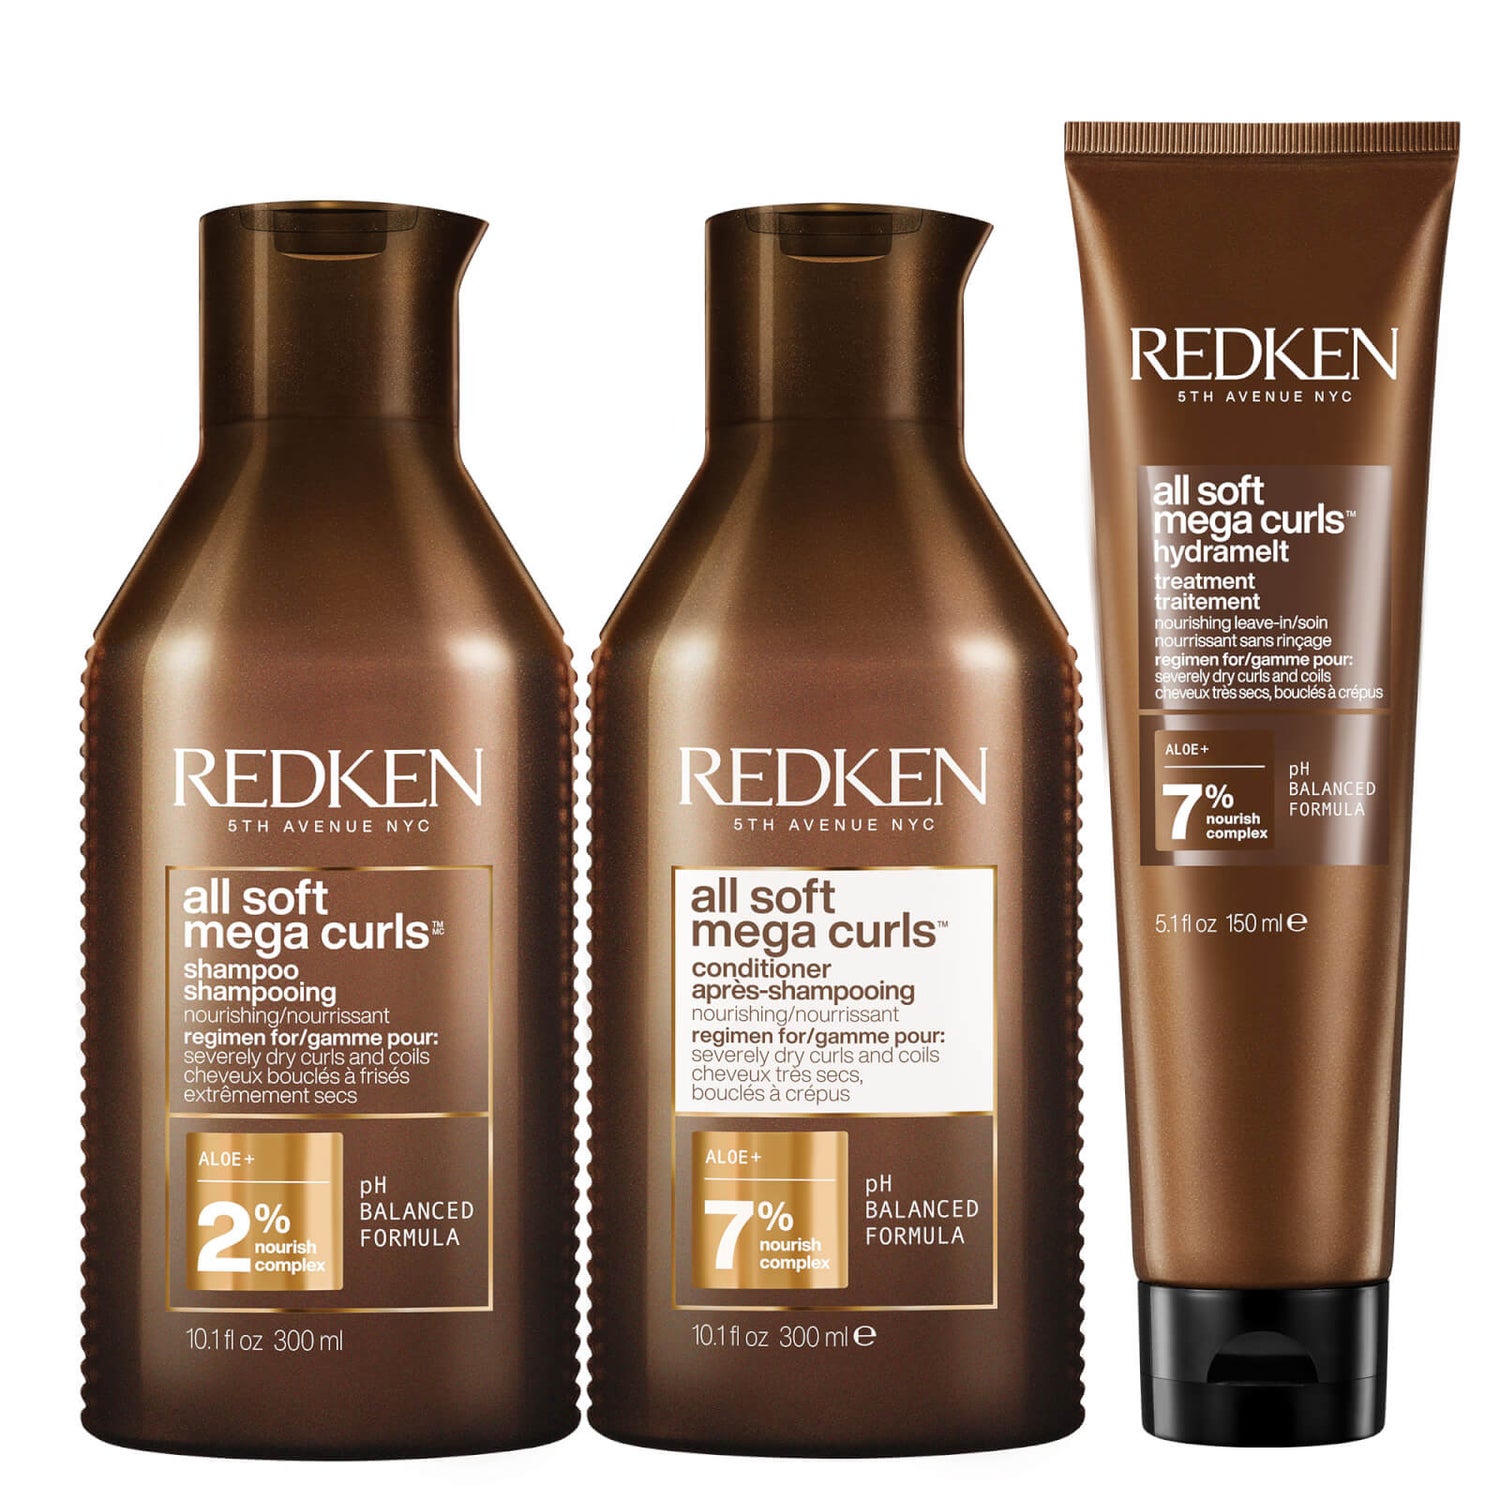 Redken All Soft Mega Curl Intense Hydrating and Nourishing Routine Set for Curly and Coily Hair